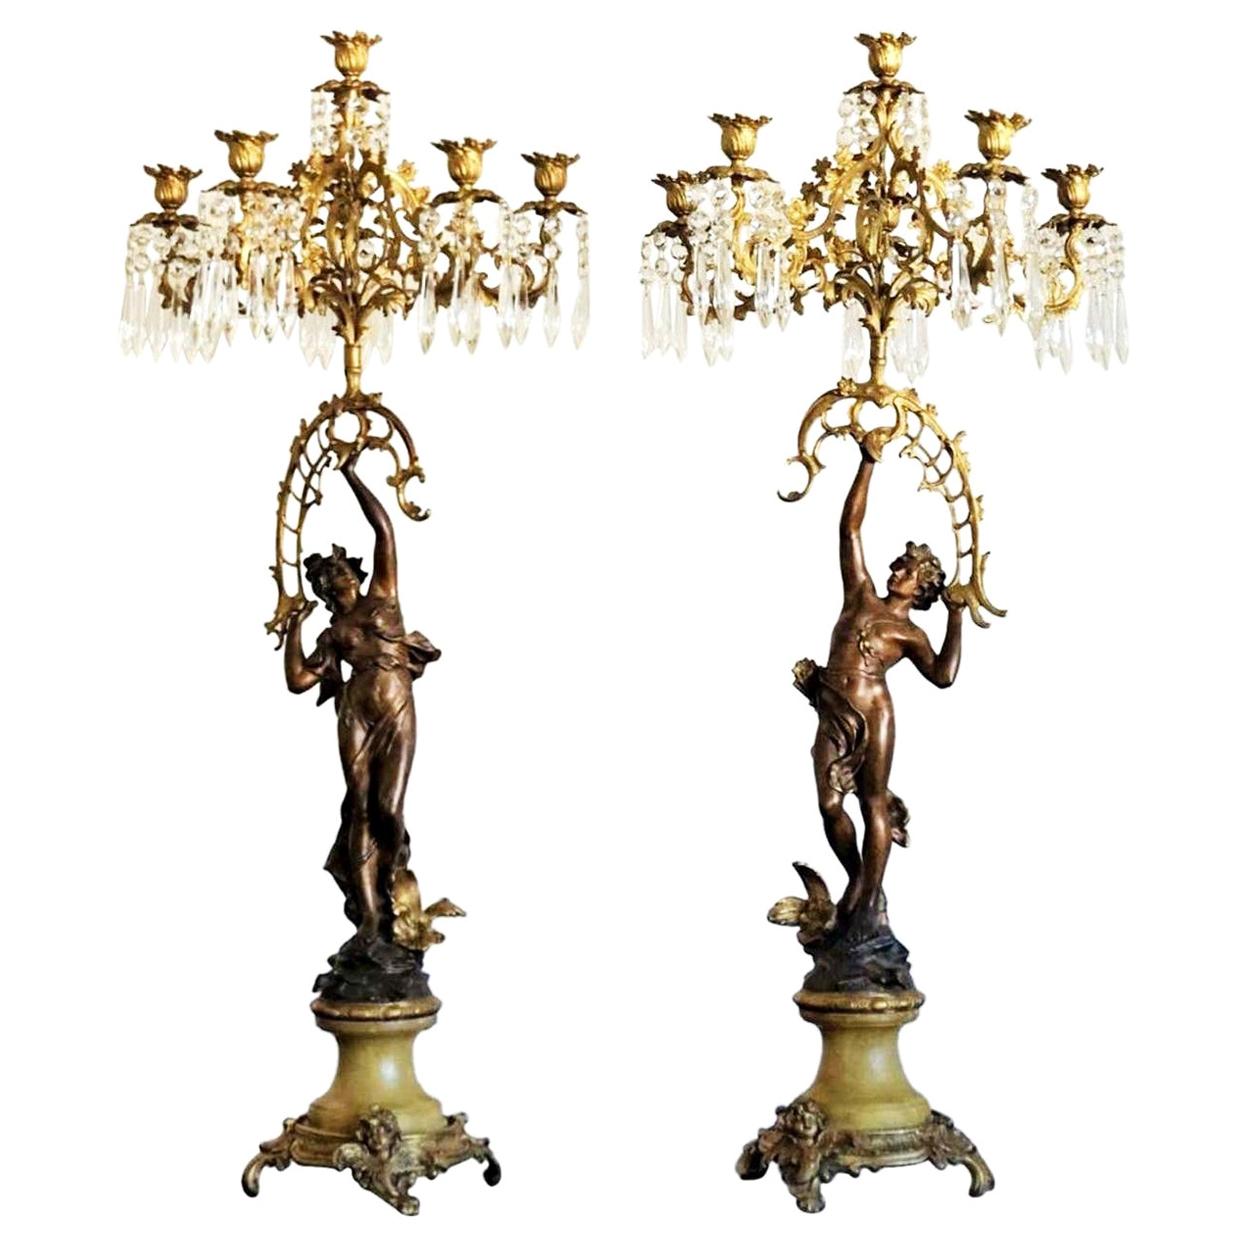 19th Century Pair of French Figurines Patinated and Doré Bronze Candelabras